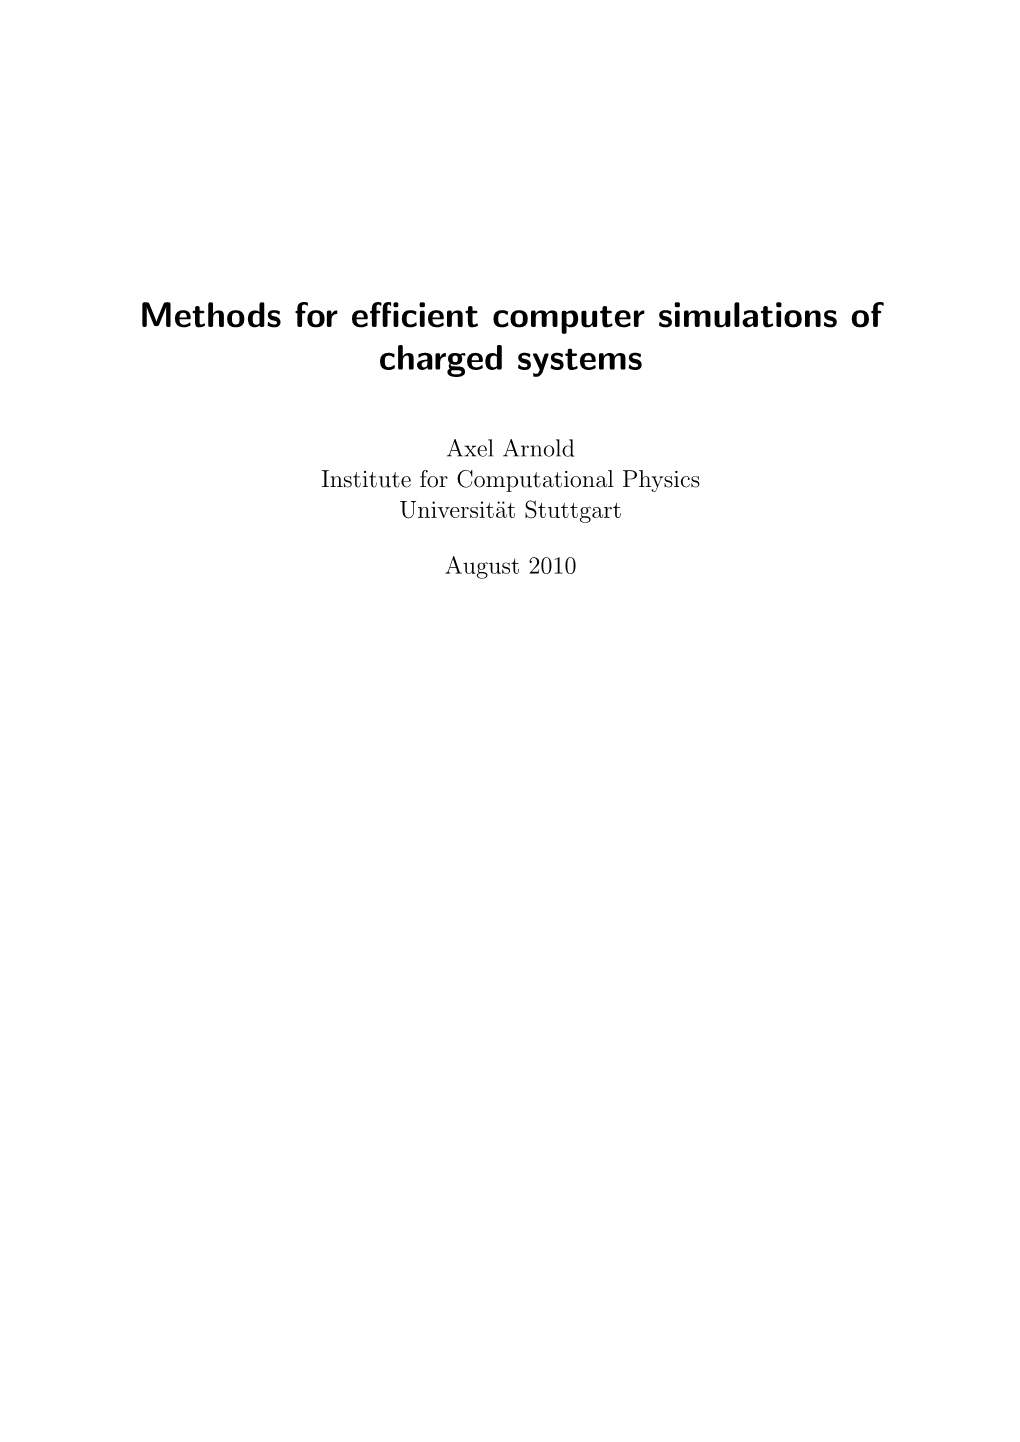 Methods for Efficient Computer Simulations of Charged Systems